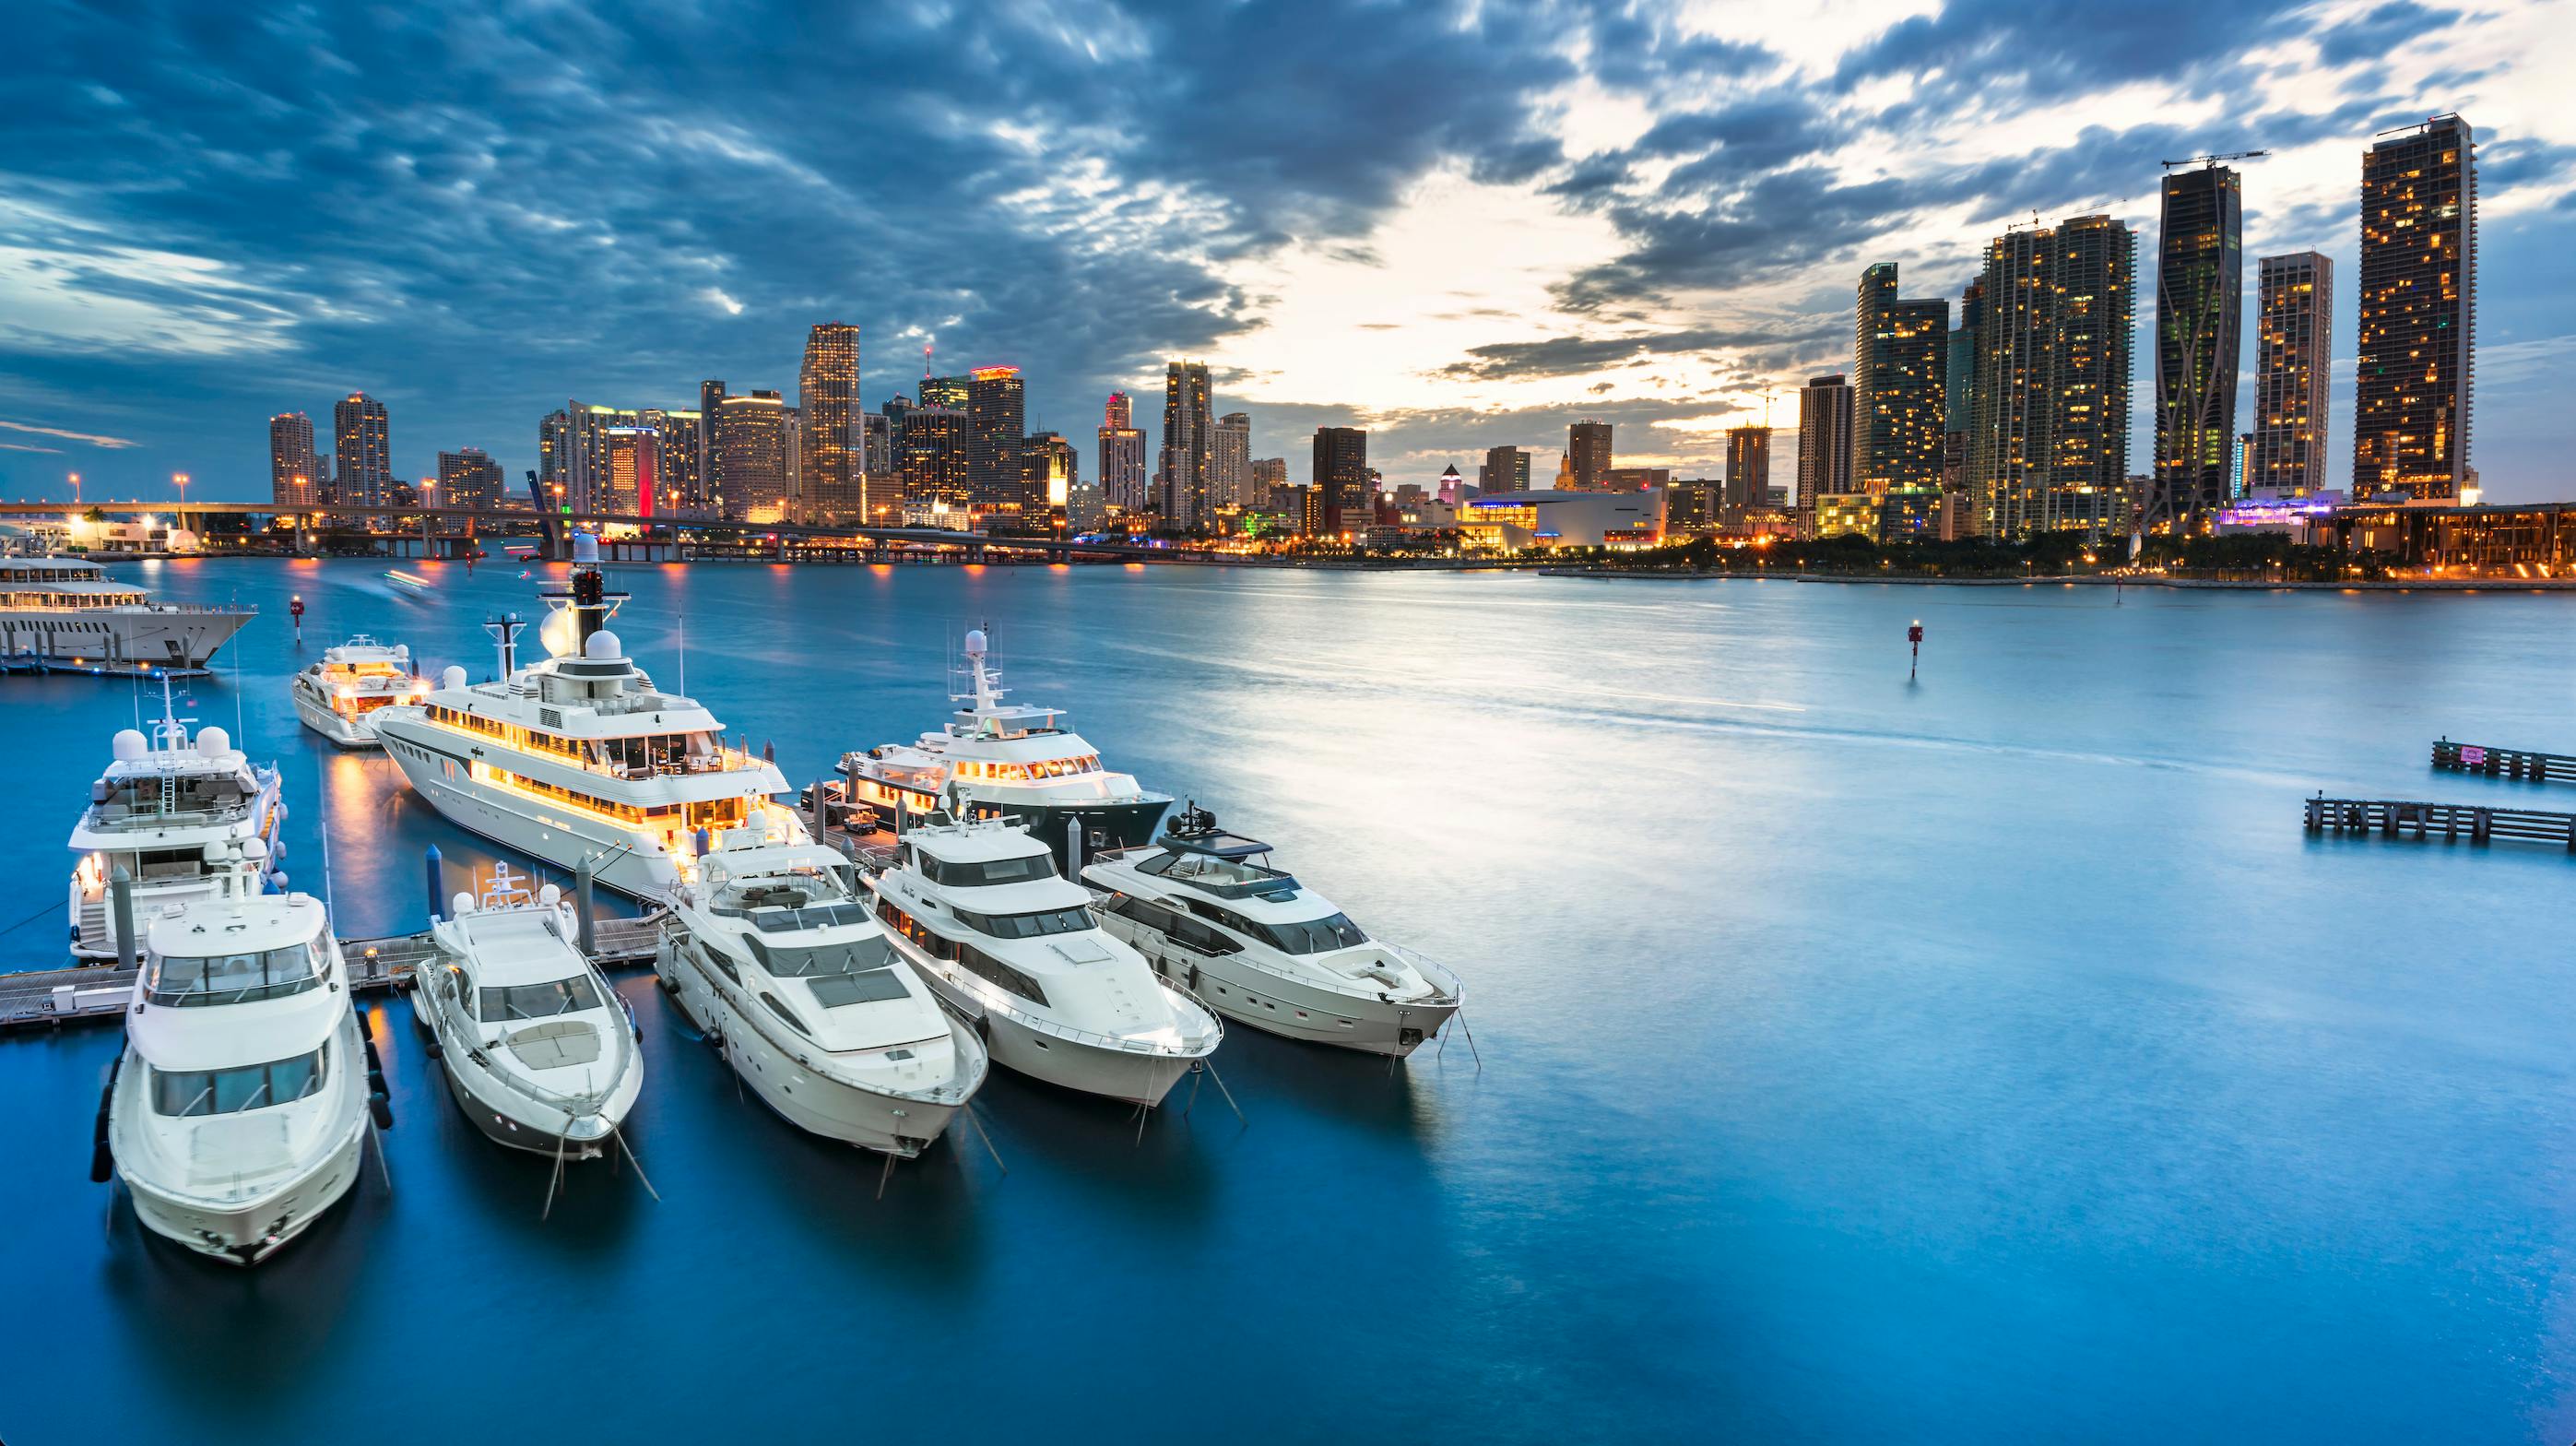 An image of a Florida harbor with boats lined up in the foreground and the Miami skyline in the background